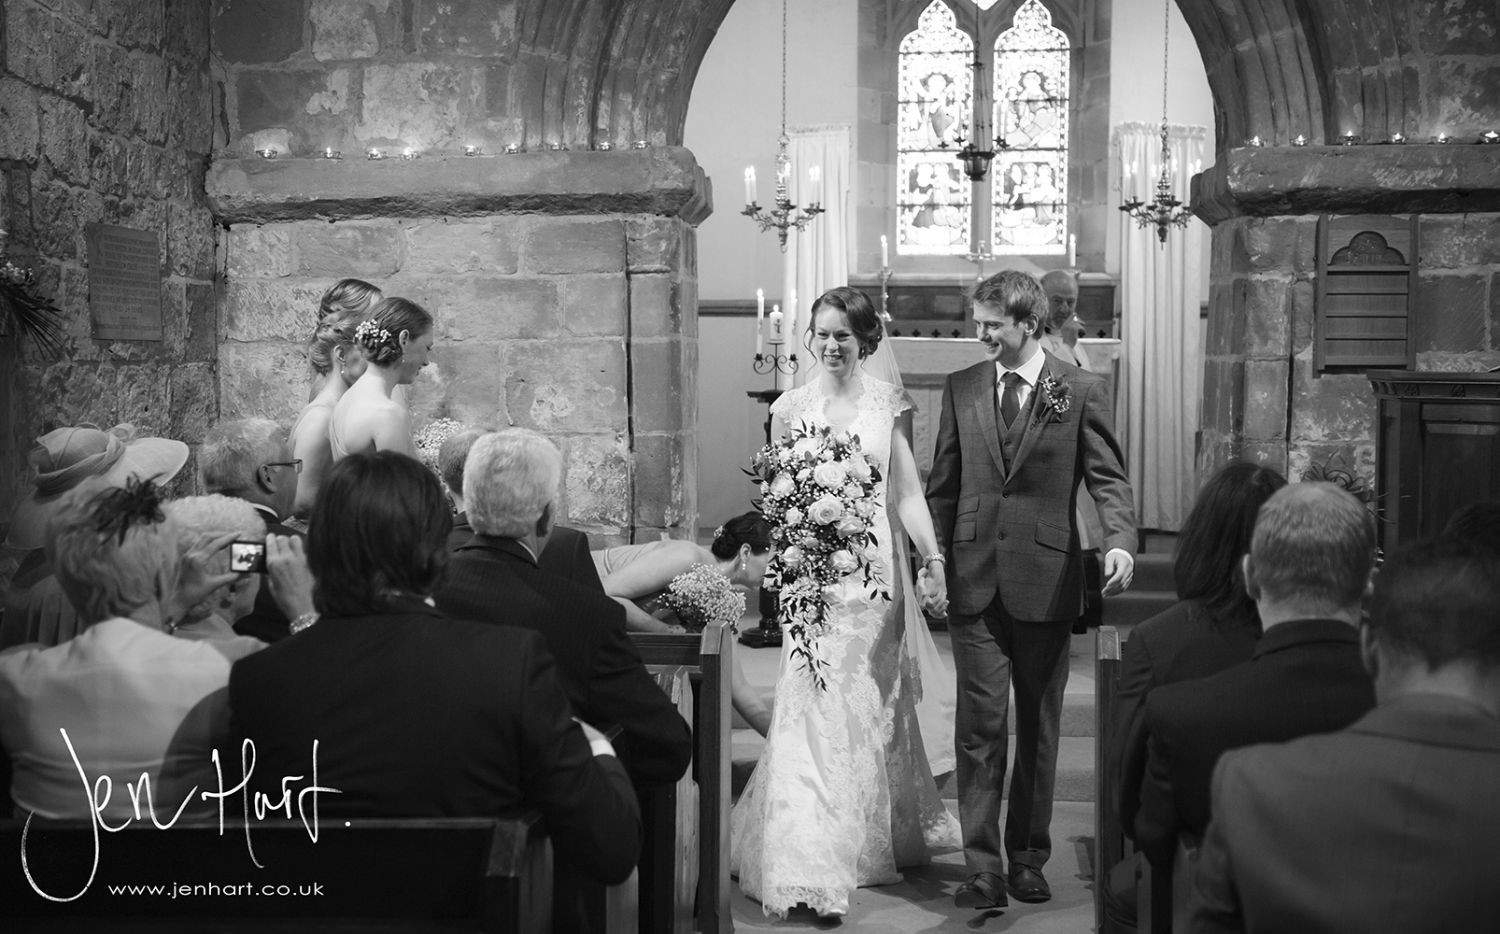 Photograph-Wedding-Whinstone-View_02May15_117